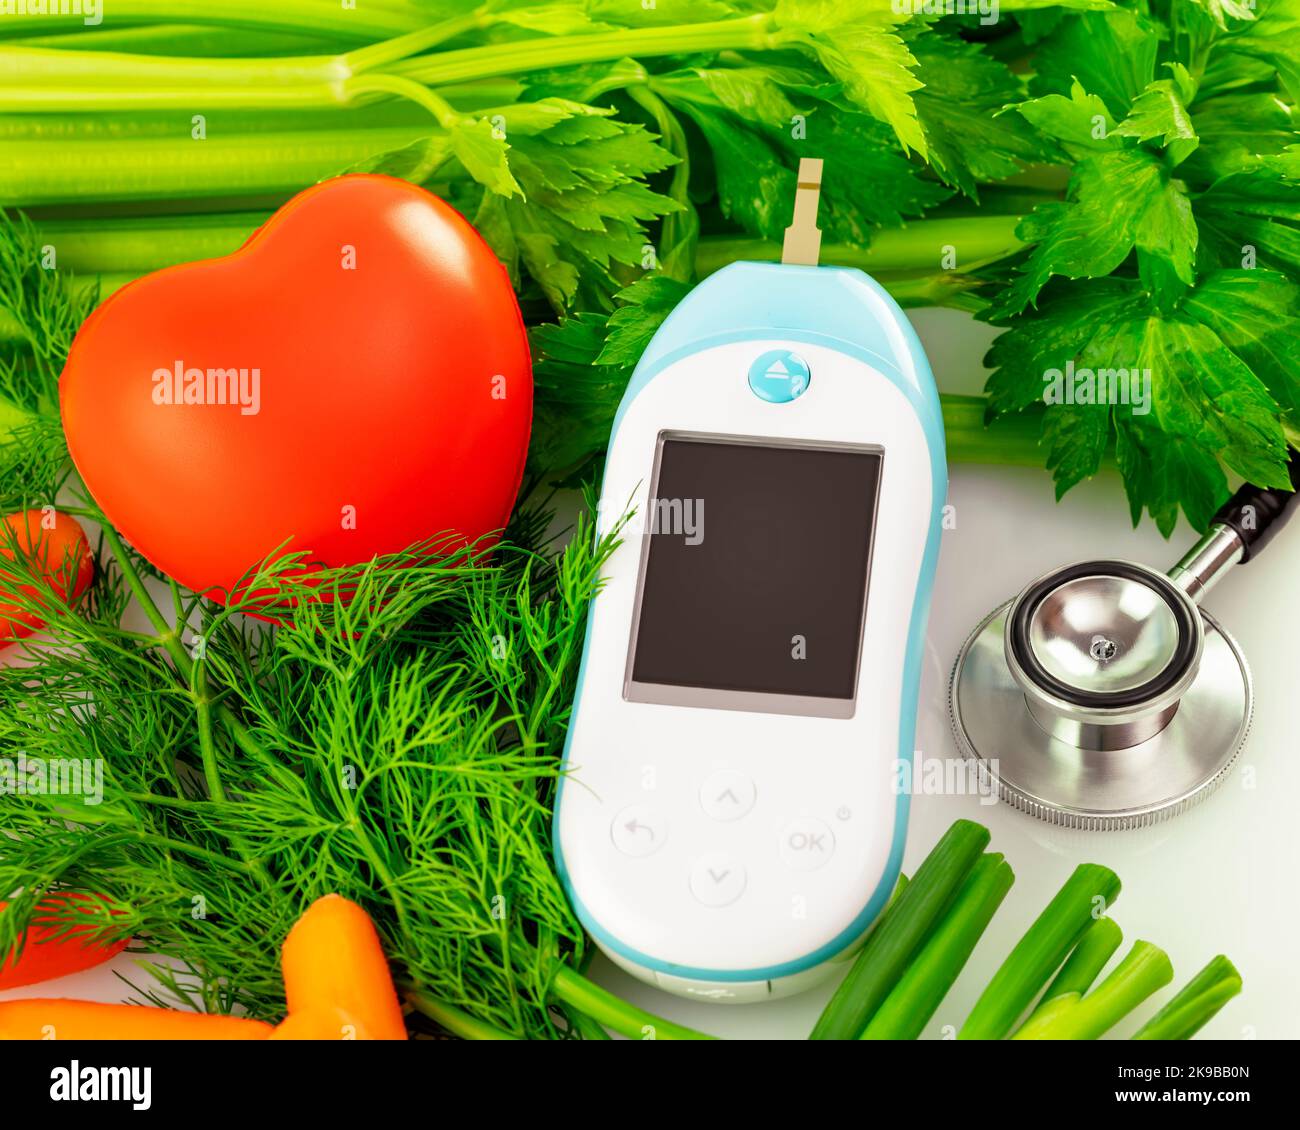 Health care and dieting concept with fresh vegetables and stethoscope, glucose meter and red heart on a white table. Control of health with diet Stock Photo